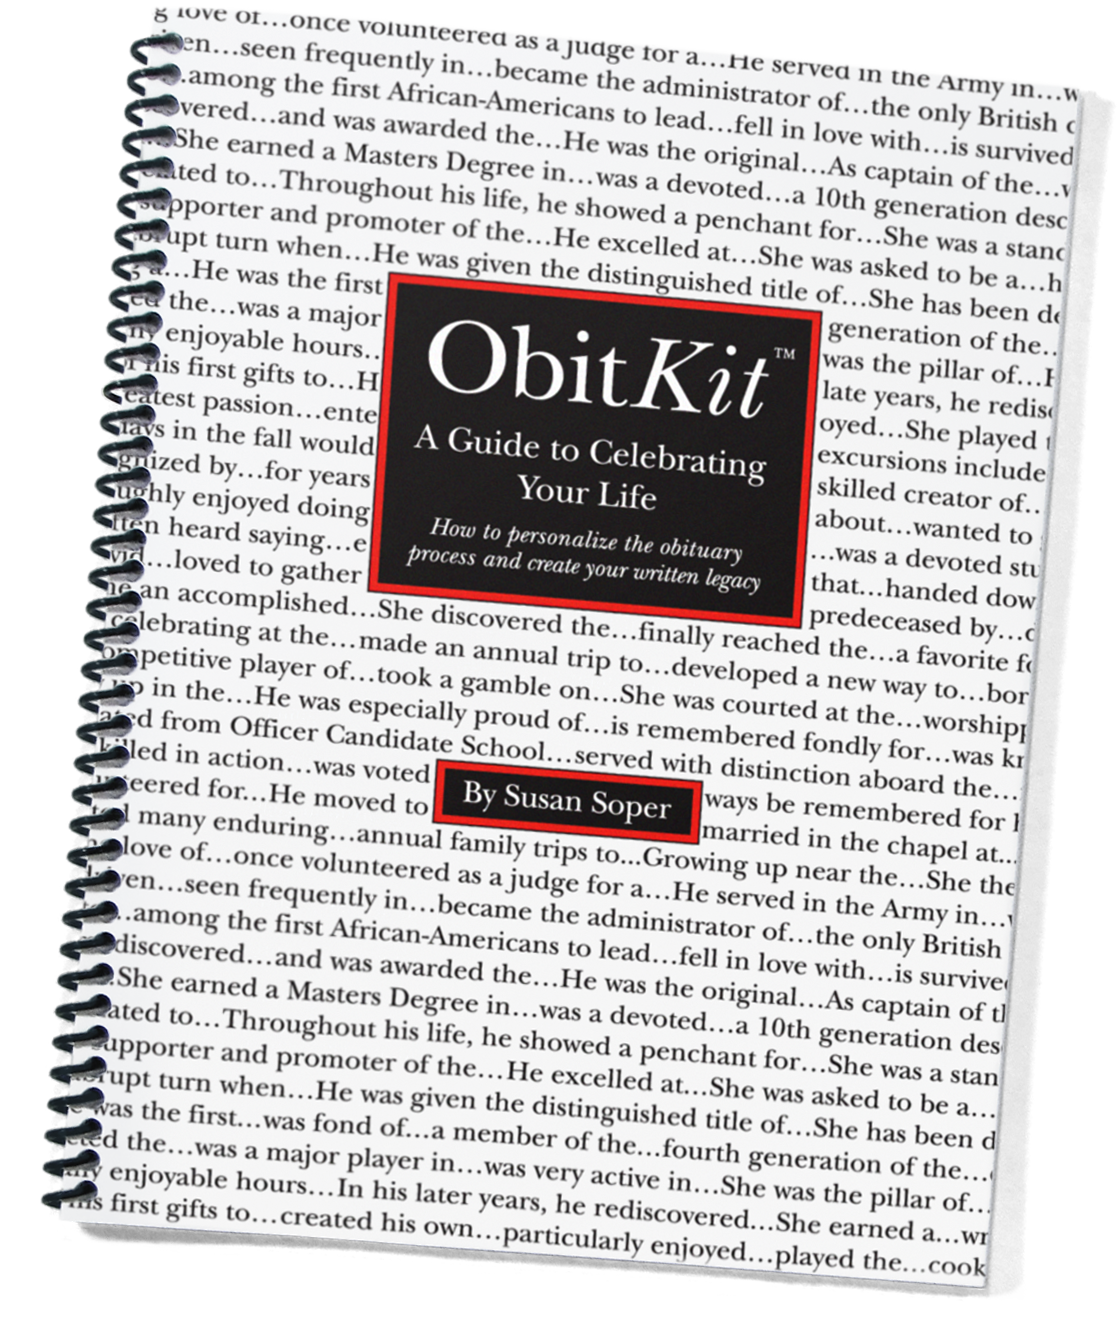 Cover photo of the ObitKit by Susan Soper